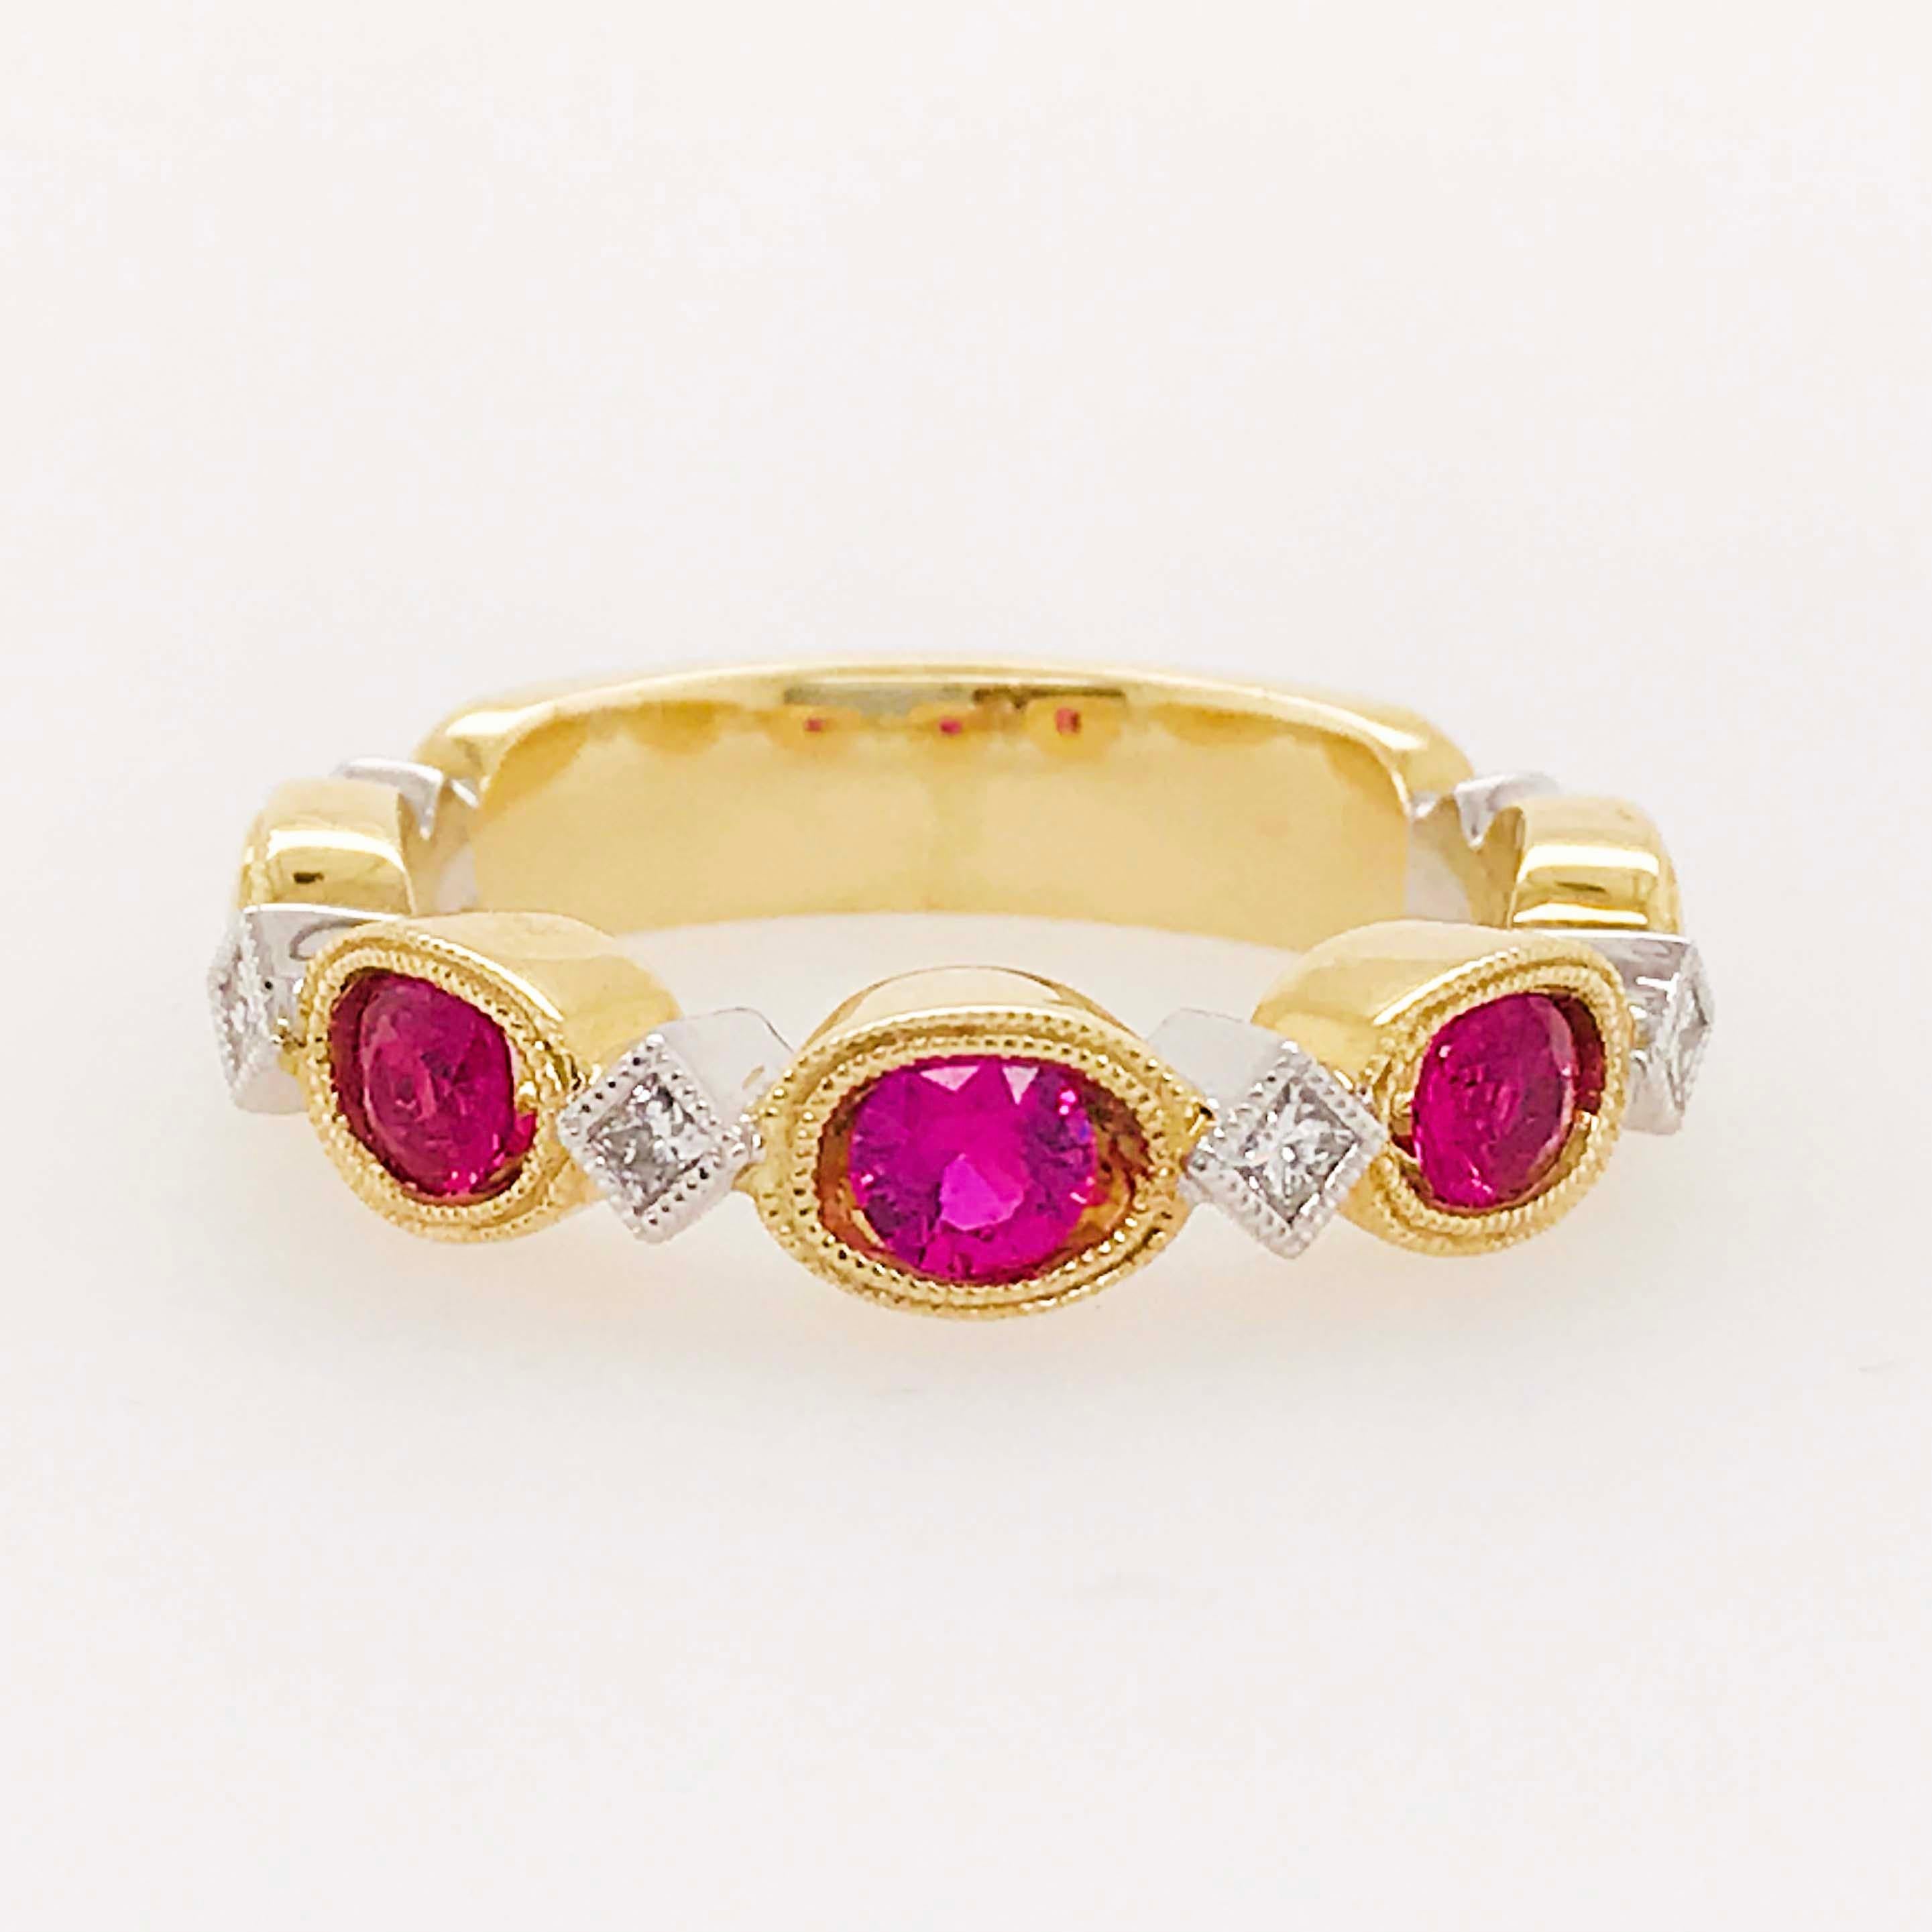 This bold and vibrant ruby and diamond band is such a special, fine jewelry piece. With genuine, natural red ruby gemstones set in rich yellow gold. The rubies are round, faceted gemstones that are set in oval, milgrain bezels. The oval settings